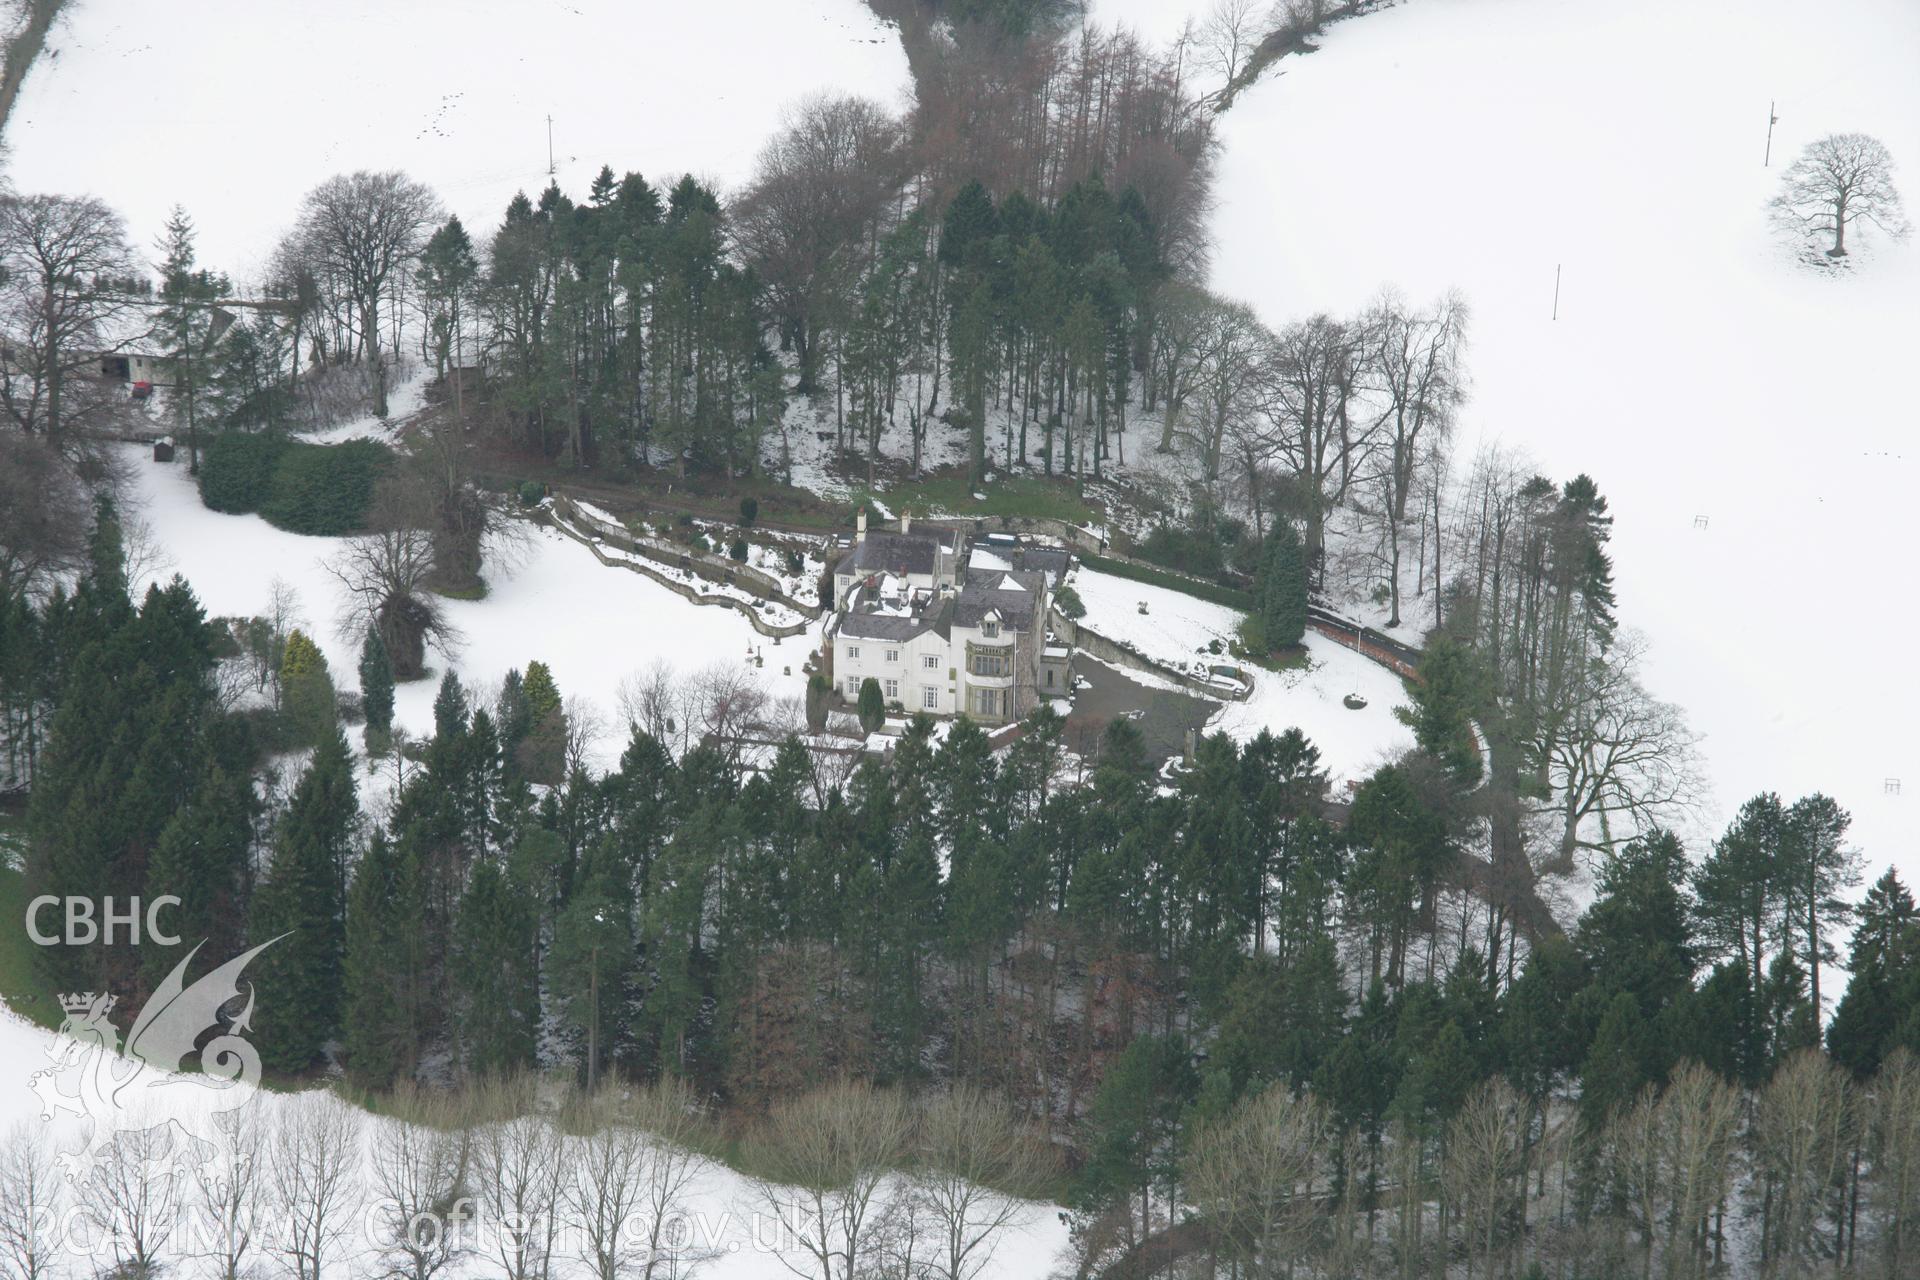 RCAHMW colour oblique aerial photograph of Gelli-Gynan Hall, Llanarmon-yn-Ial. A view from the east under snow. Taken on 06 March 2006 by Toby Driver.